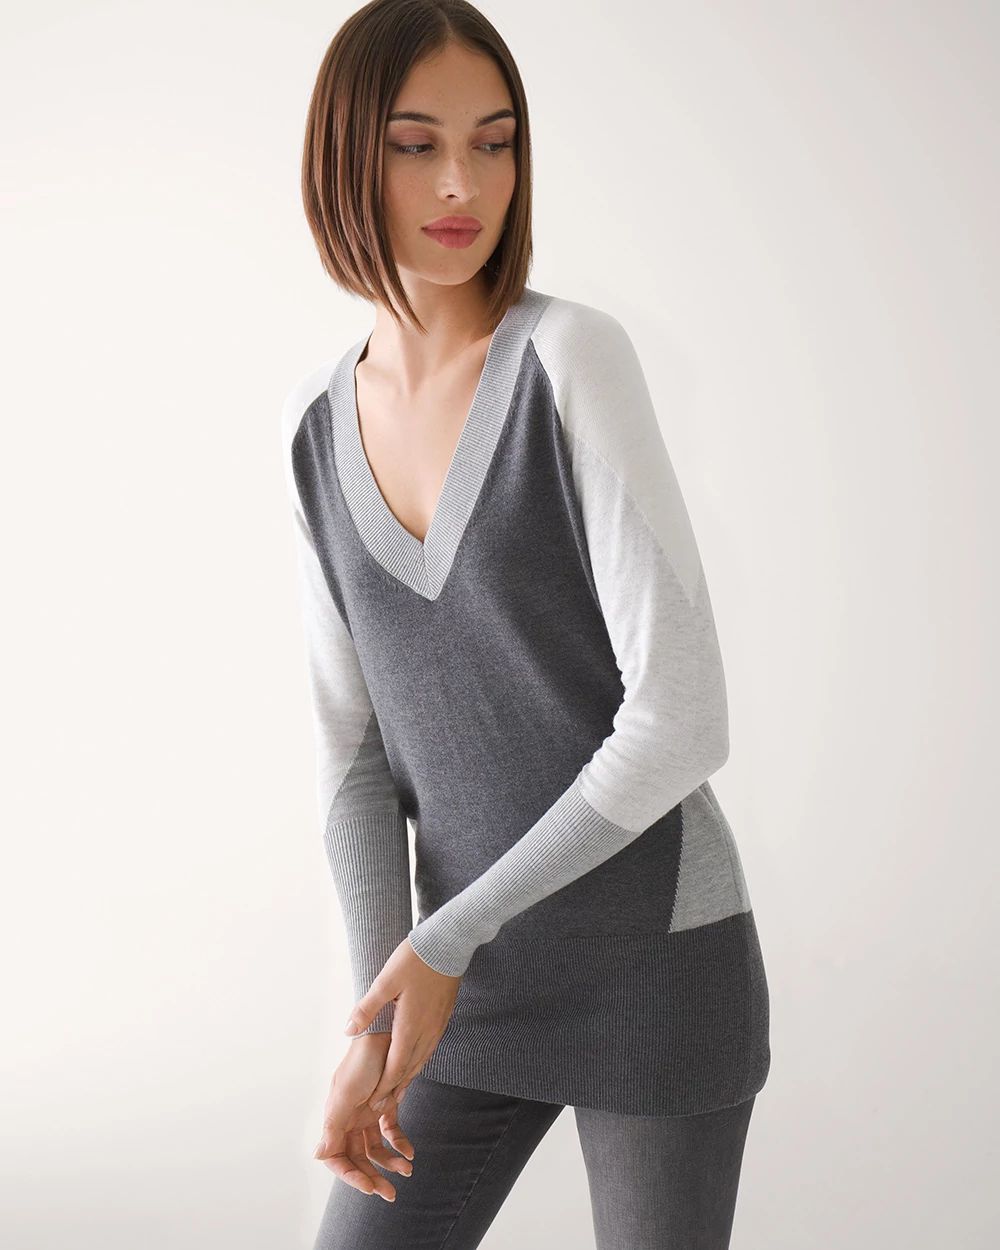 Petite Long Sleeve Color Block Tunic click to view larger image.